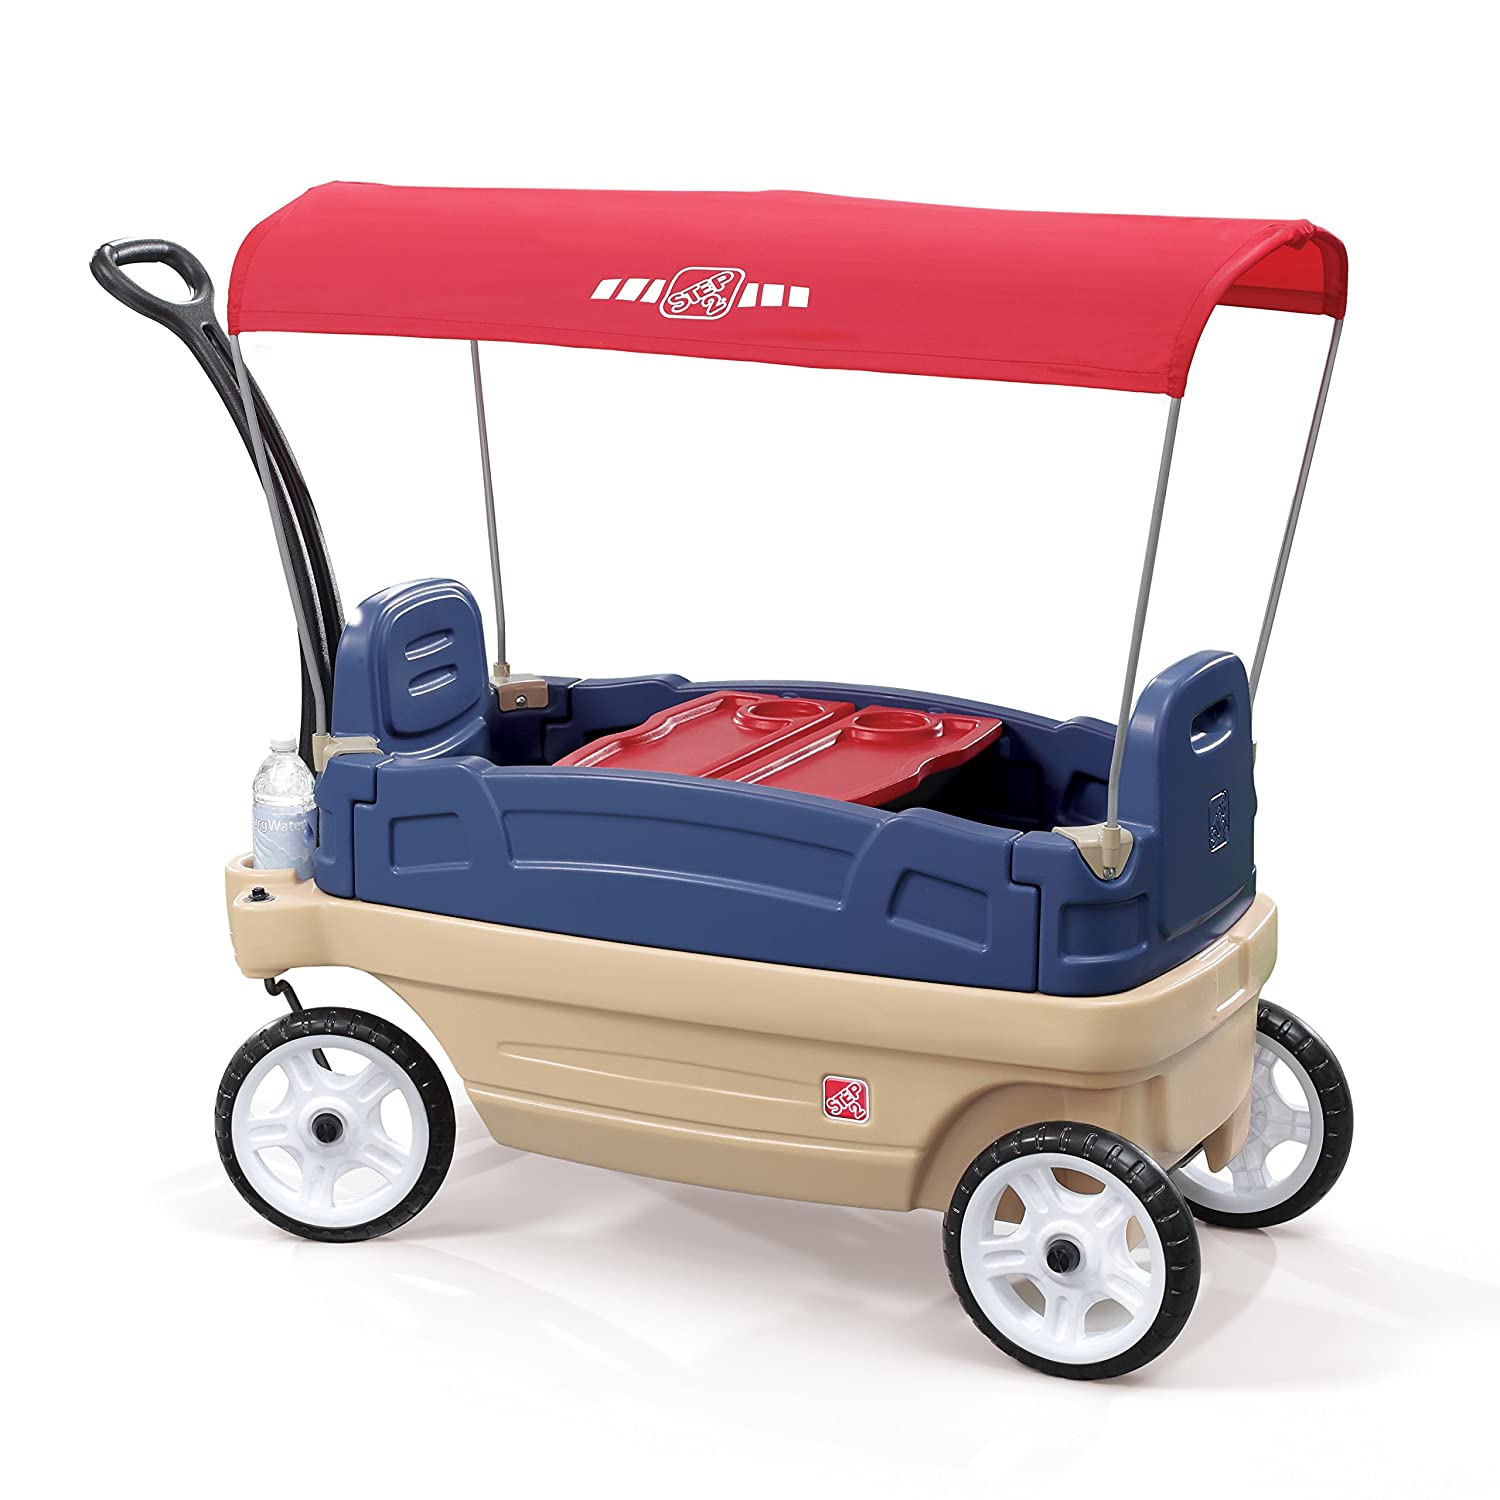 Top 10 Best Wagons for Kids Reviews in 2022 8